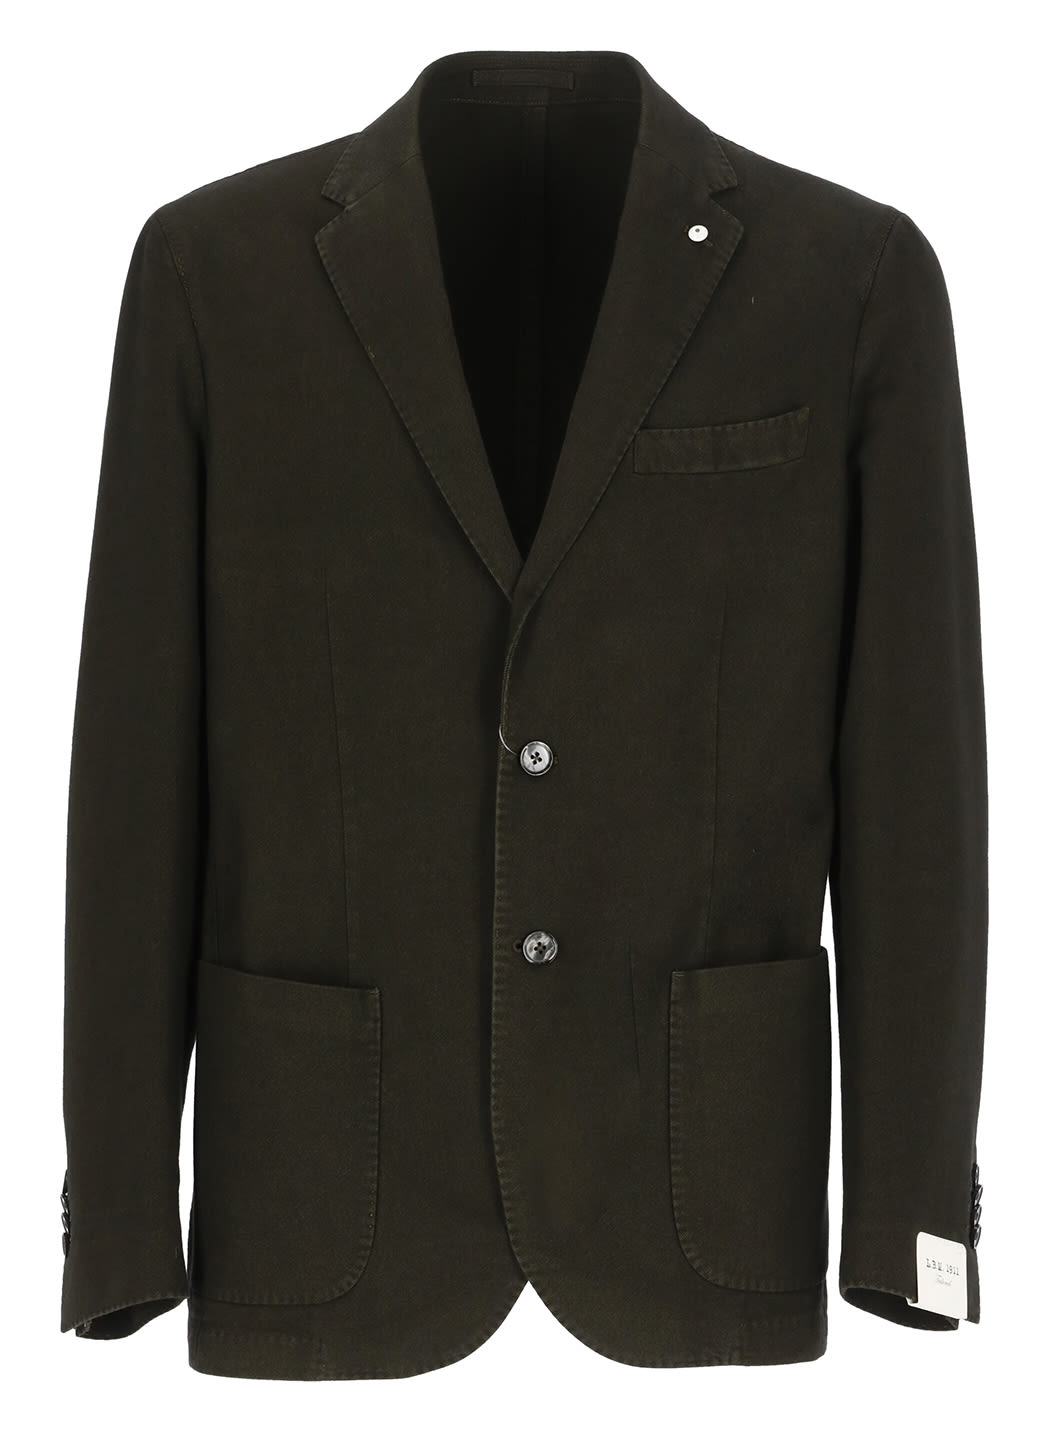 L.B.M. 1911 Single-breasted Cotton Jacket